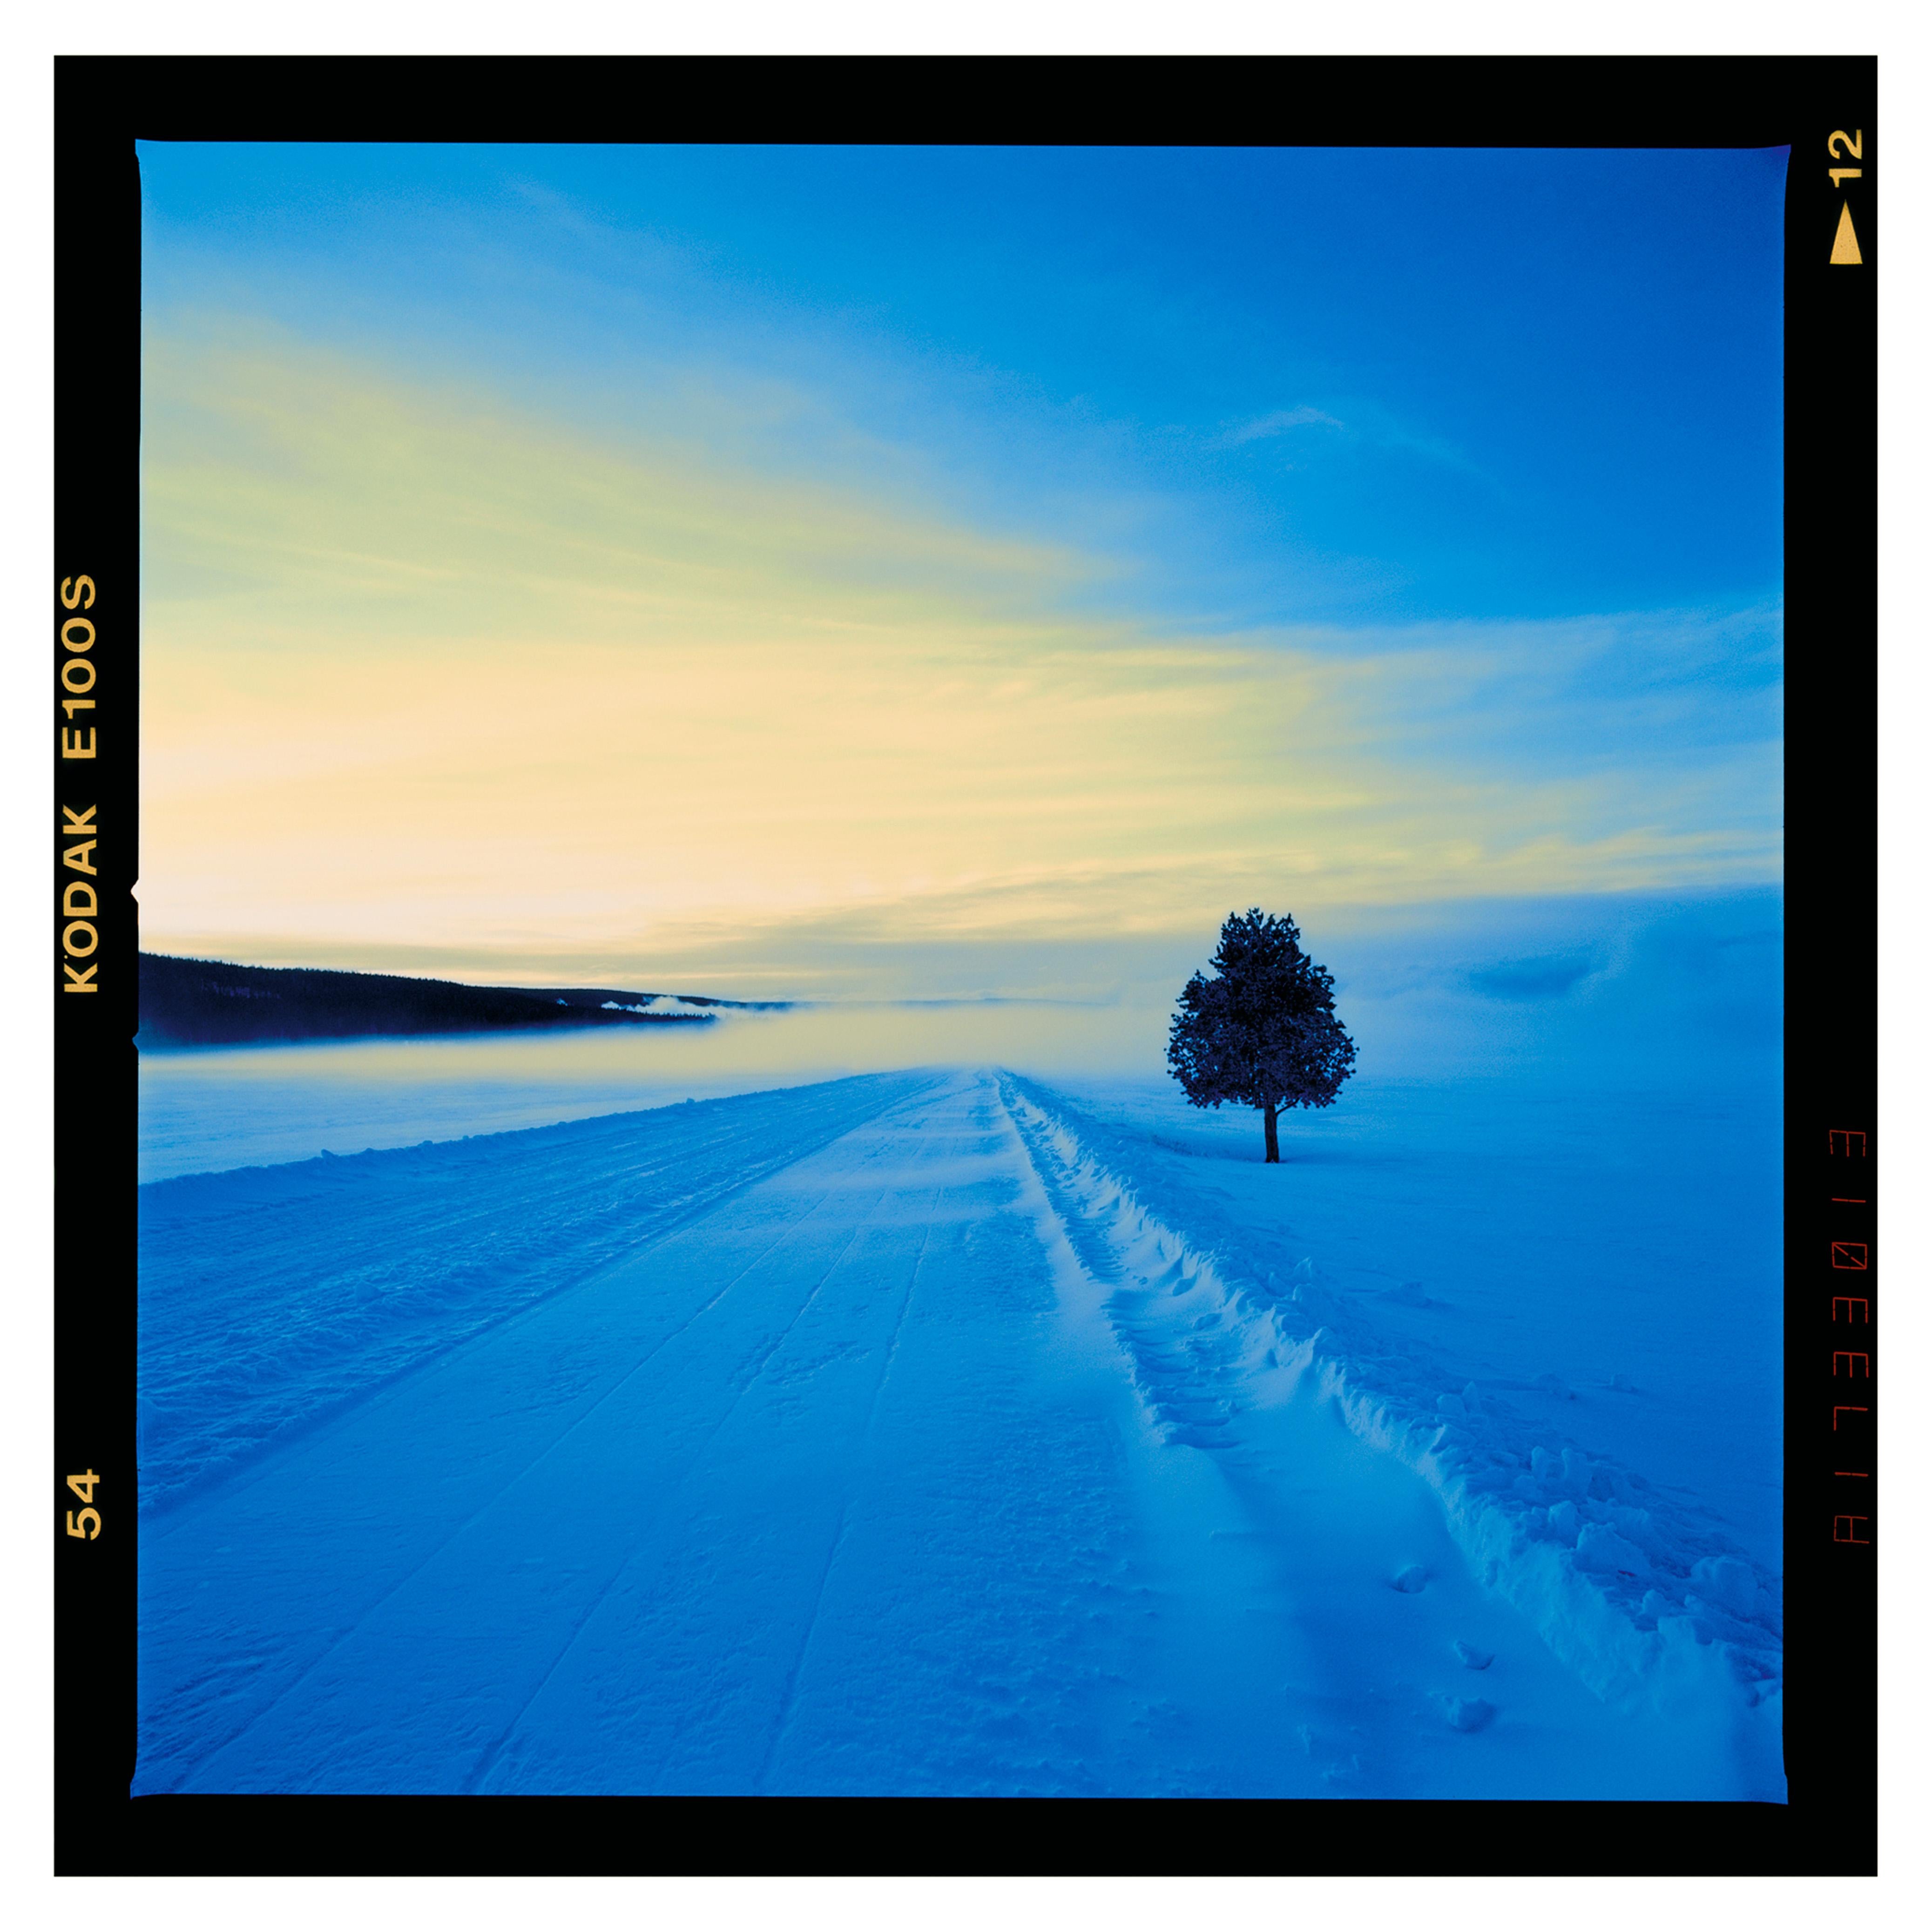 West Yellowstone Tree at Dawn - Photograph by Nick Vedros